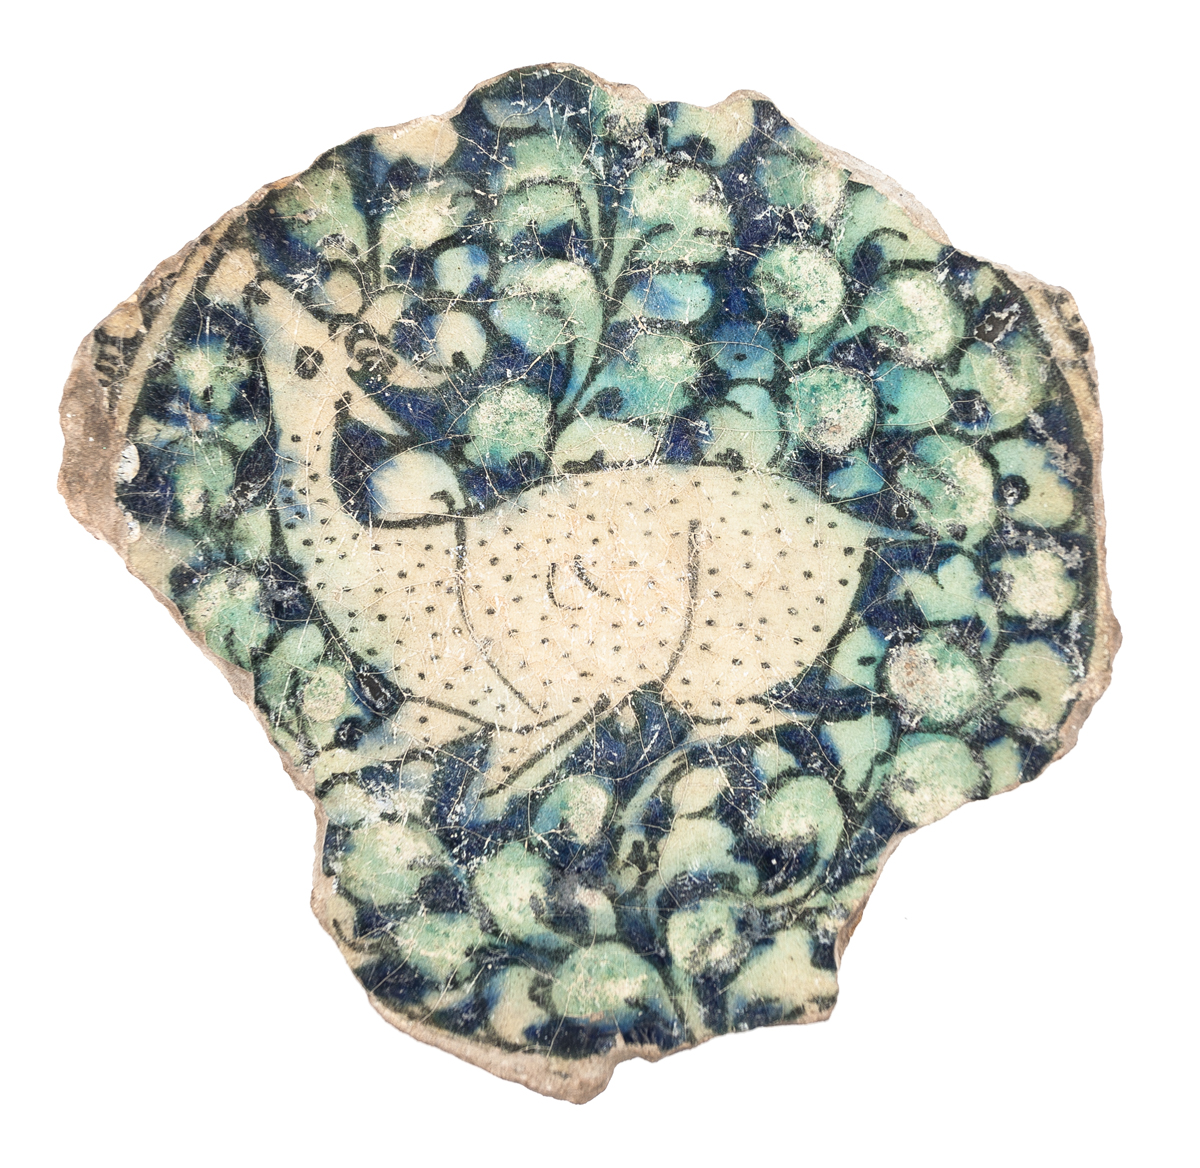 Ceramic fragment from the bottom of a vase · 19th century